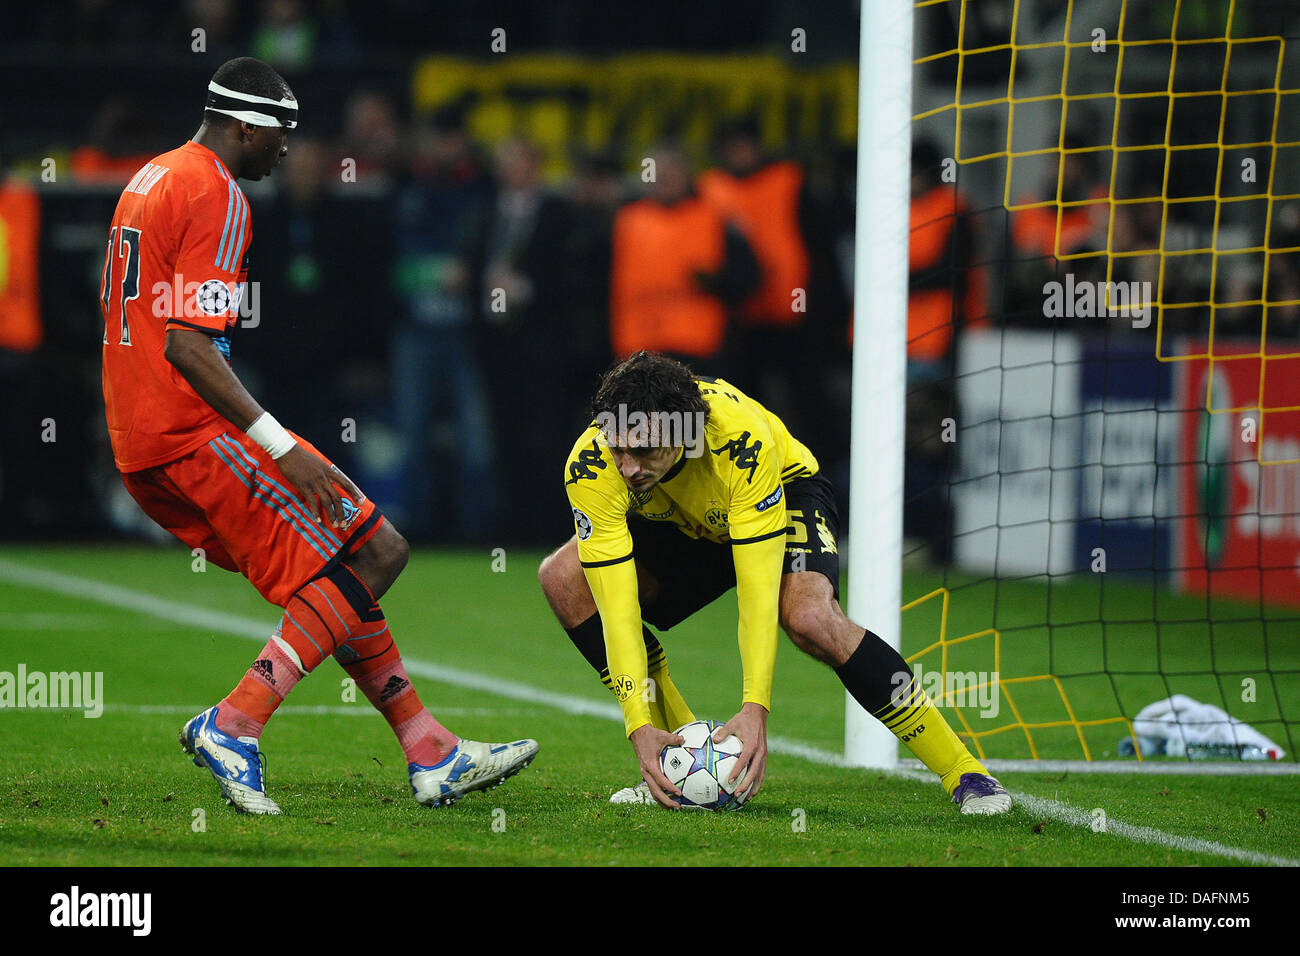 Marseille's player Stephane Mbia vies for the ball with Dortmund's Mats Hummels (R) during the Champions League soccer match between Borussia Dortmund and Olympique Marseille at the Iduna Park stadium in Dortmund, Germany, 6 December 2011.  Photo: Revierfoto Stock Photo